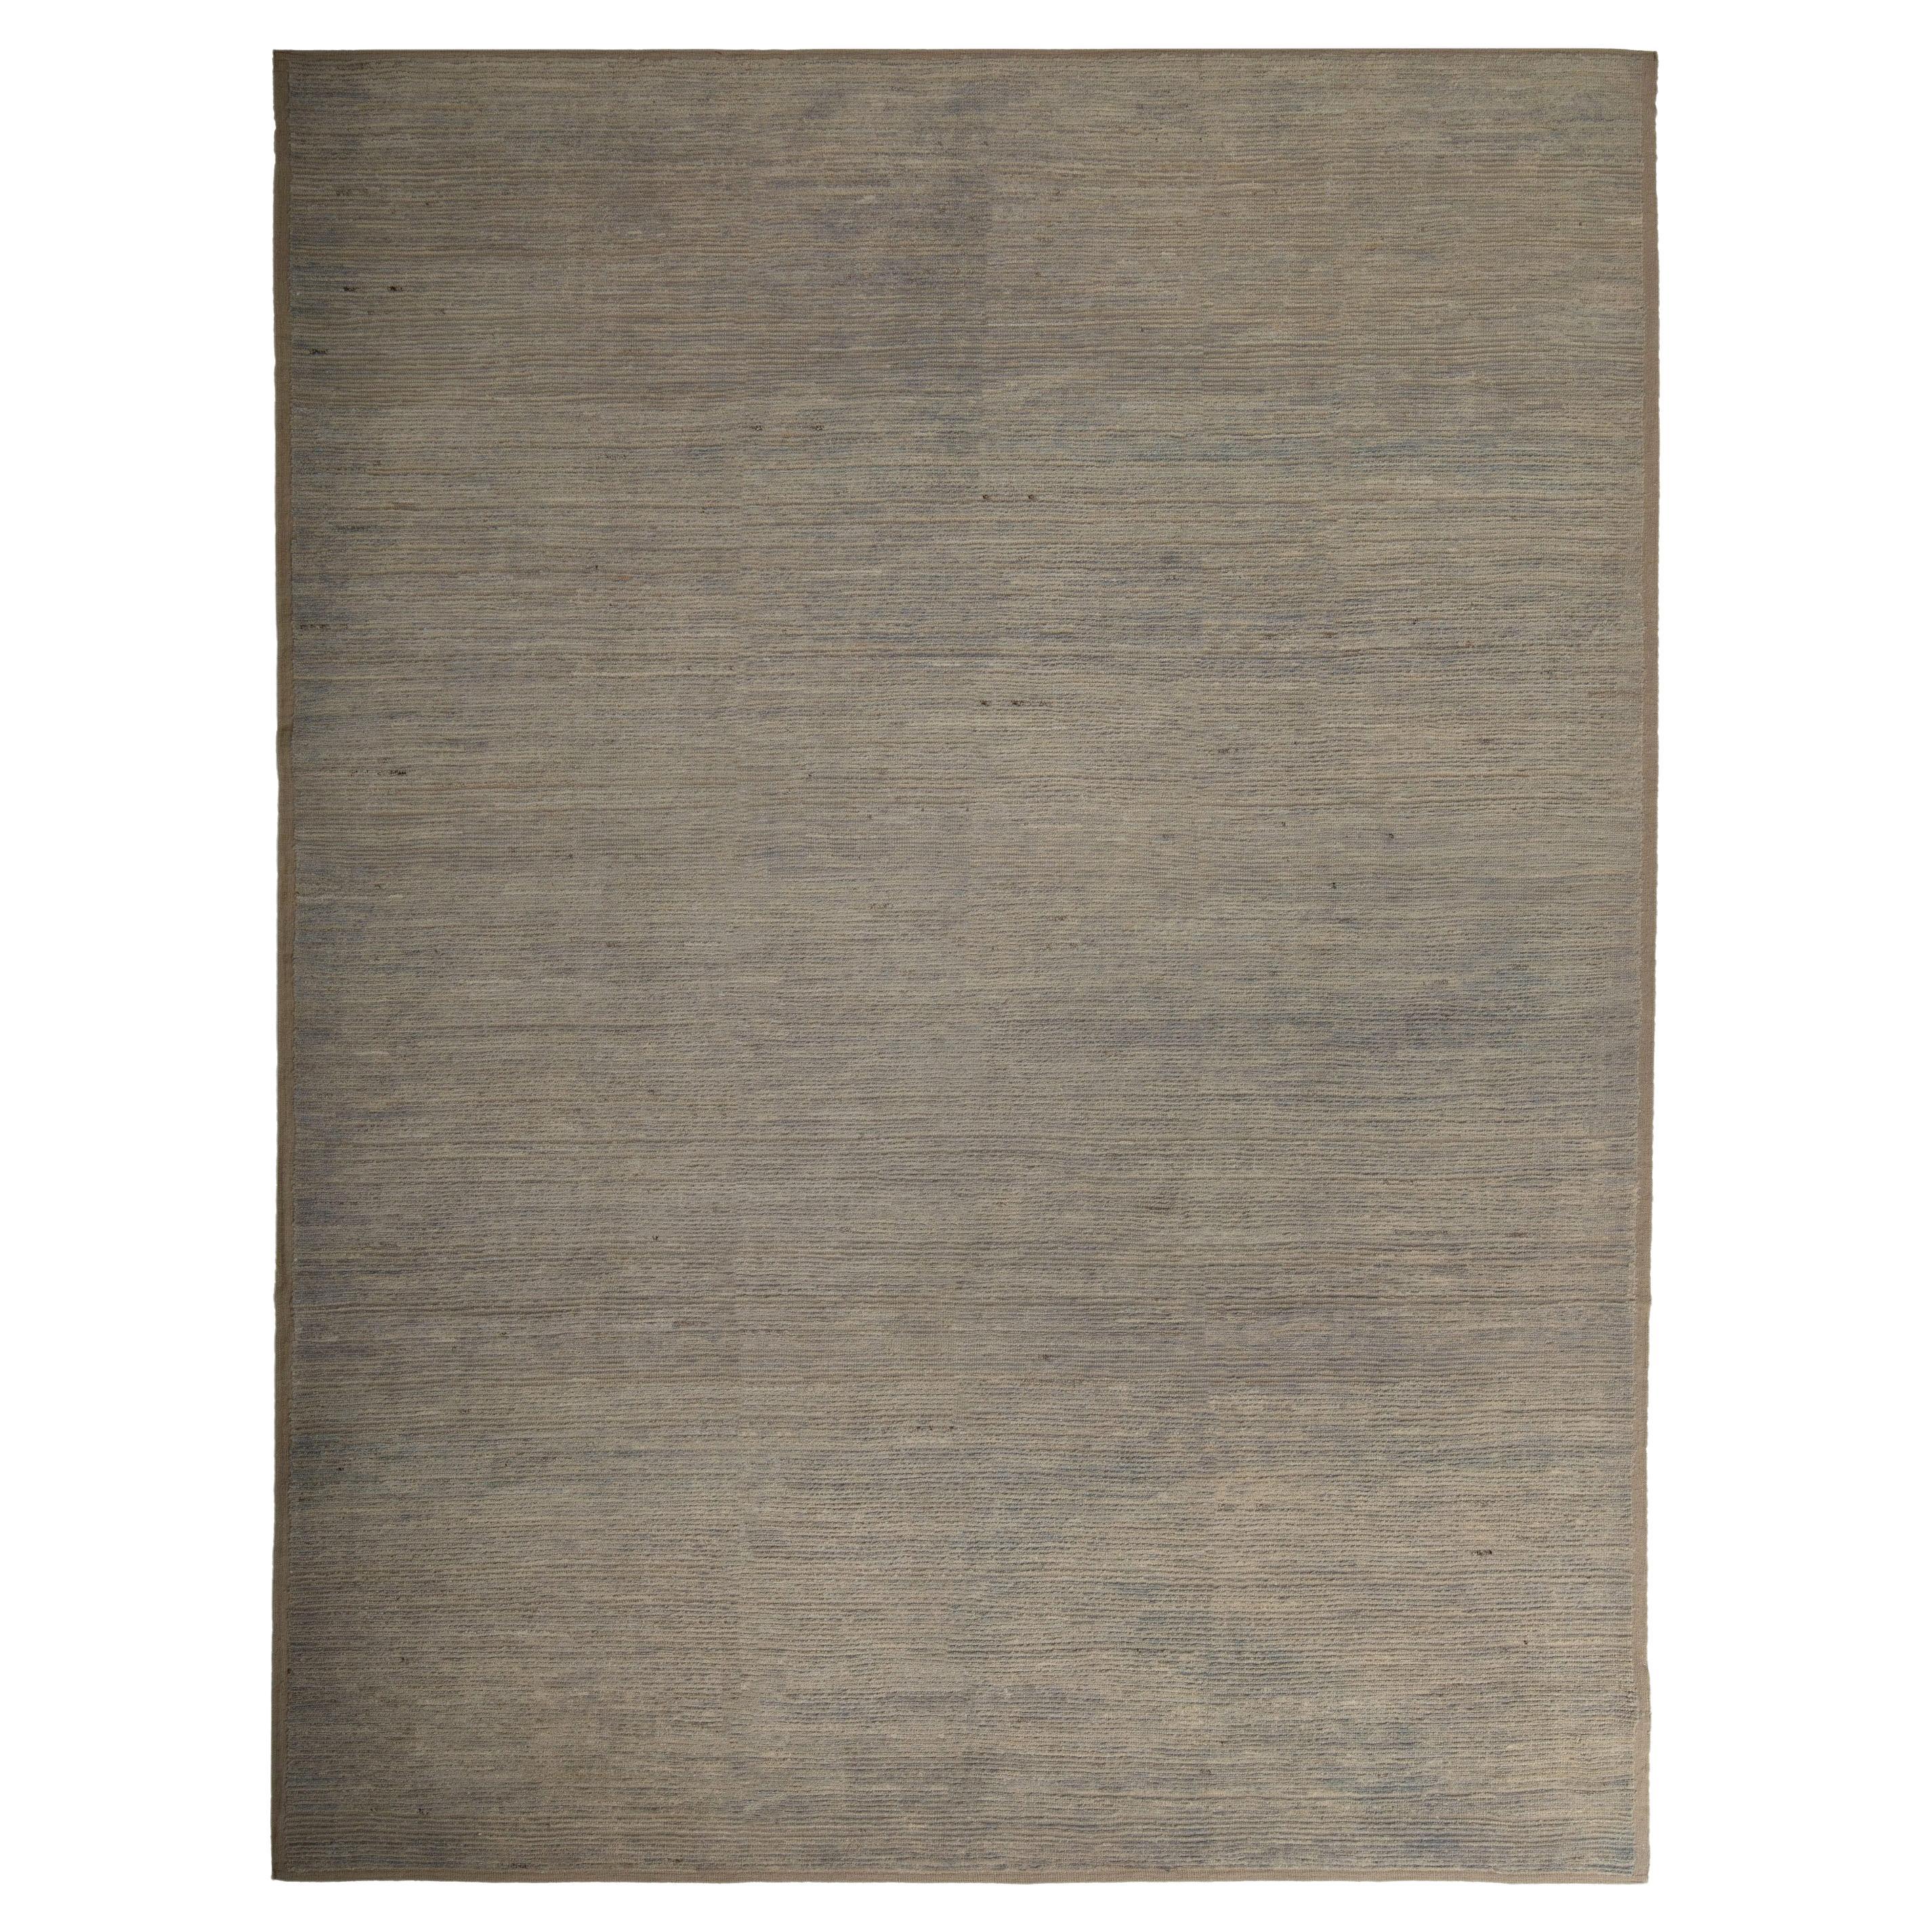 abc carpet Zameen Patterned Modern Wool Rug - 9'3" x 12' For Sale